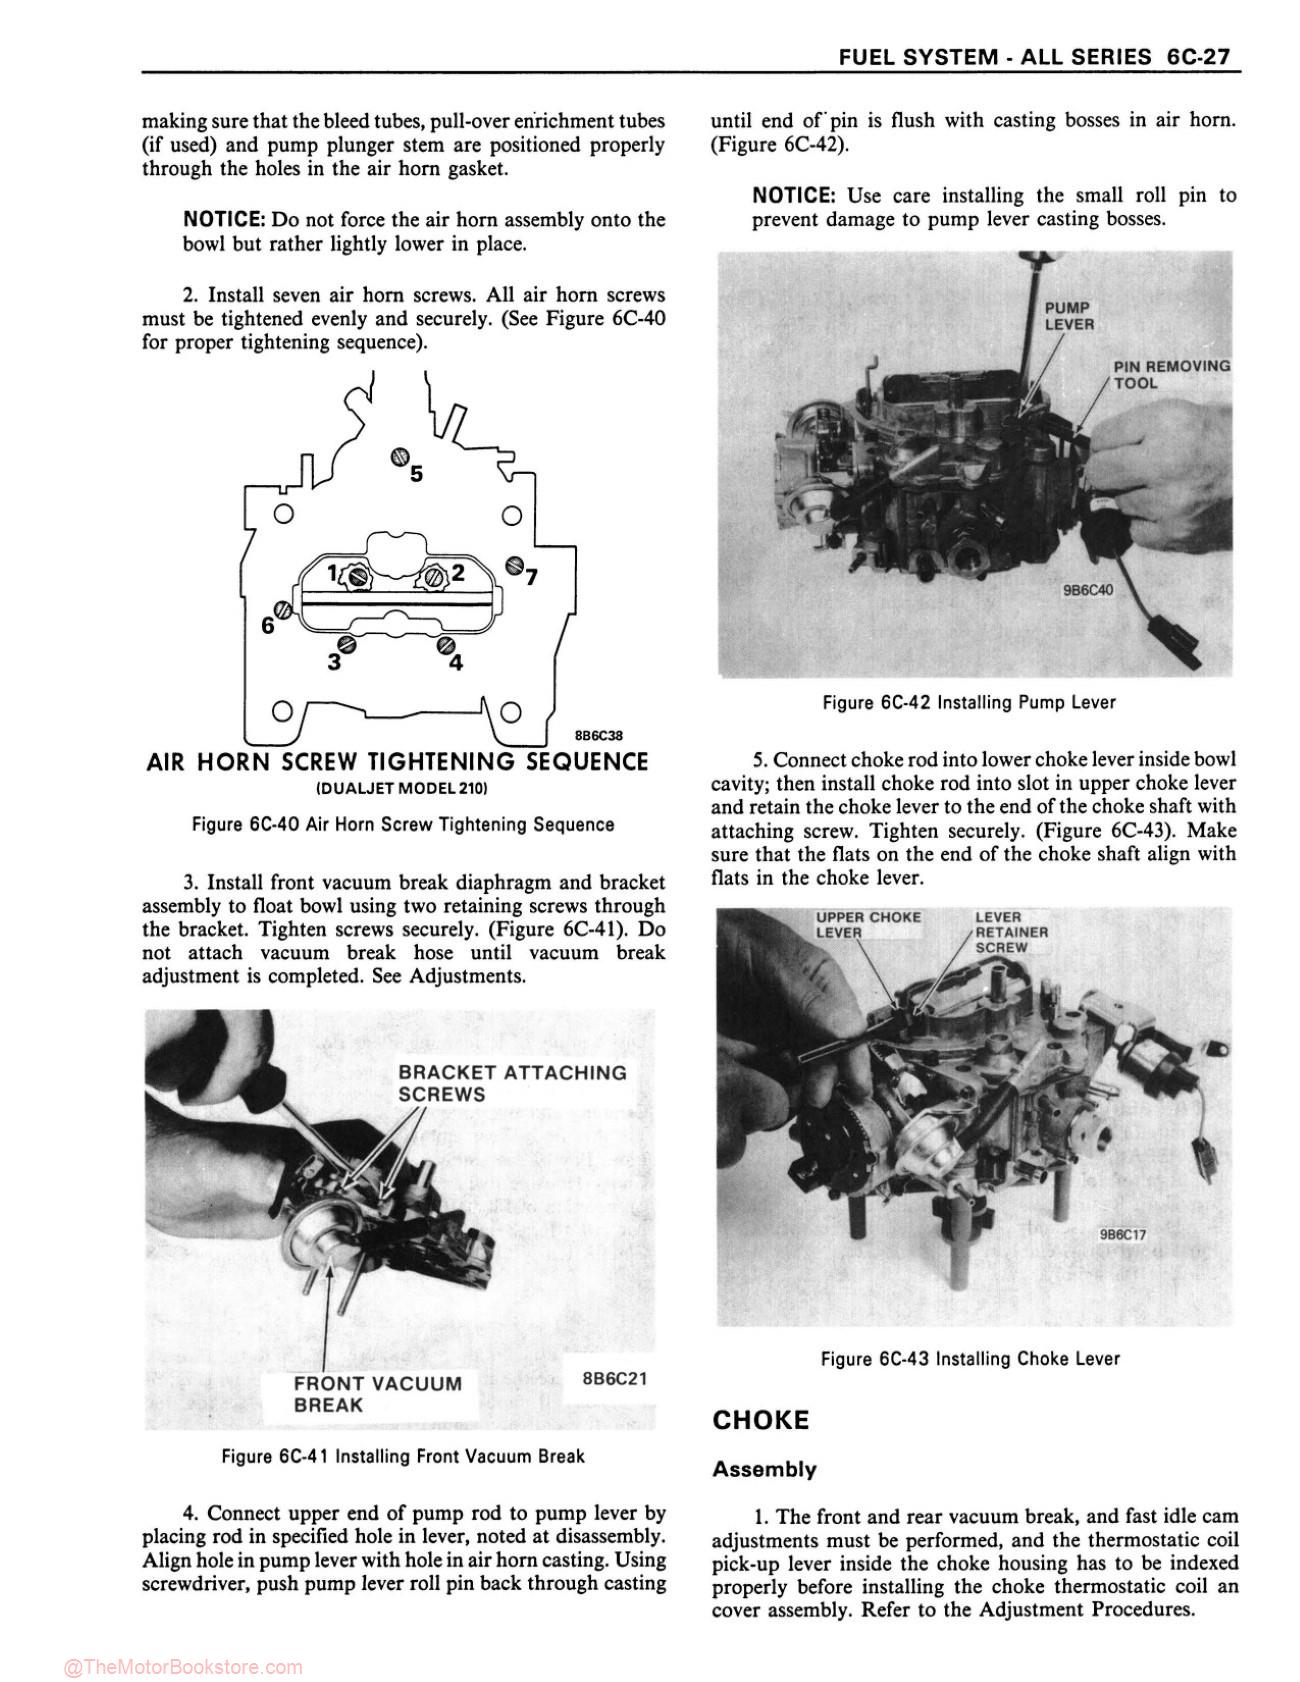 1980 Buick Chassis Service Manual - Sample Page 1